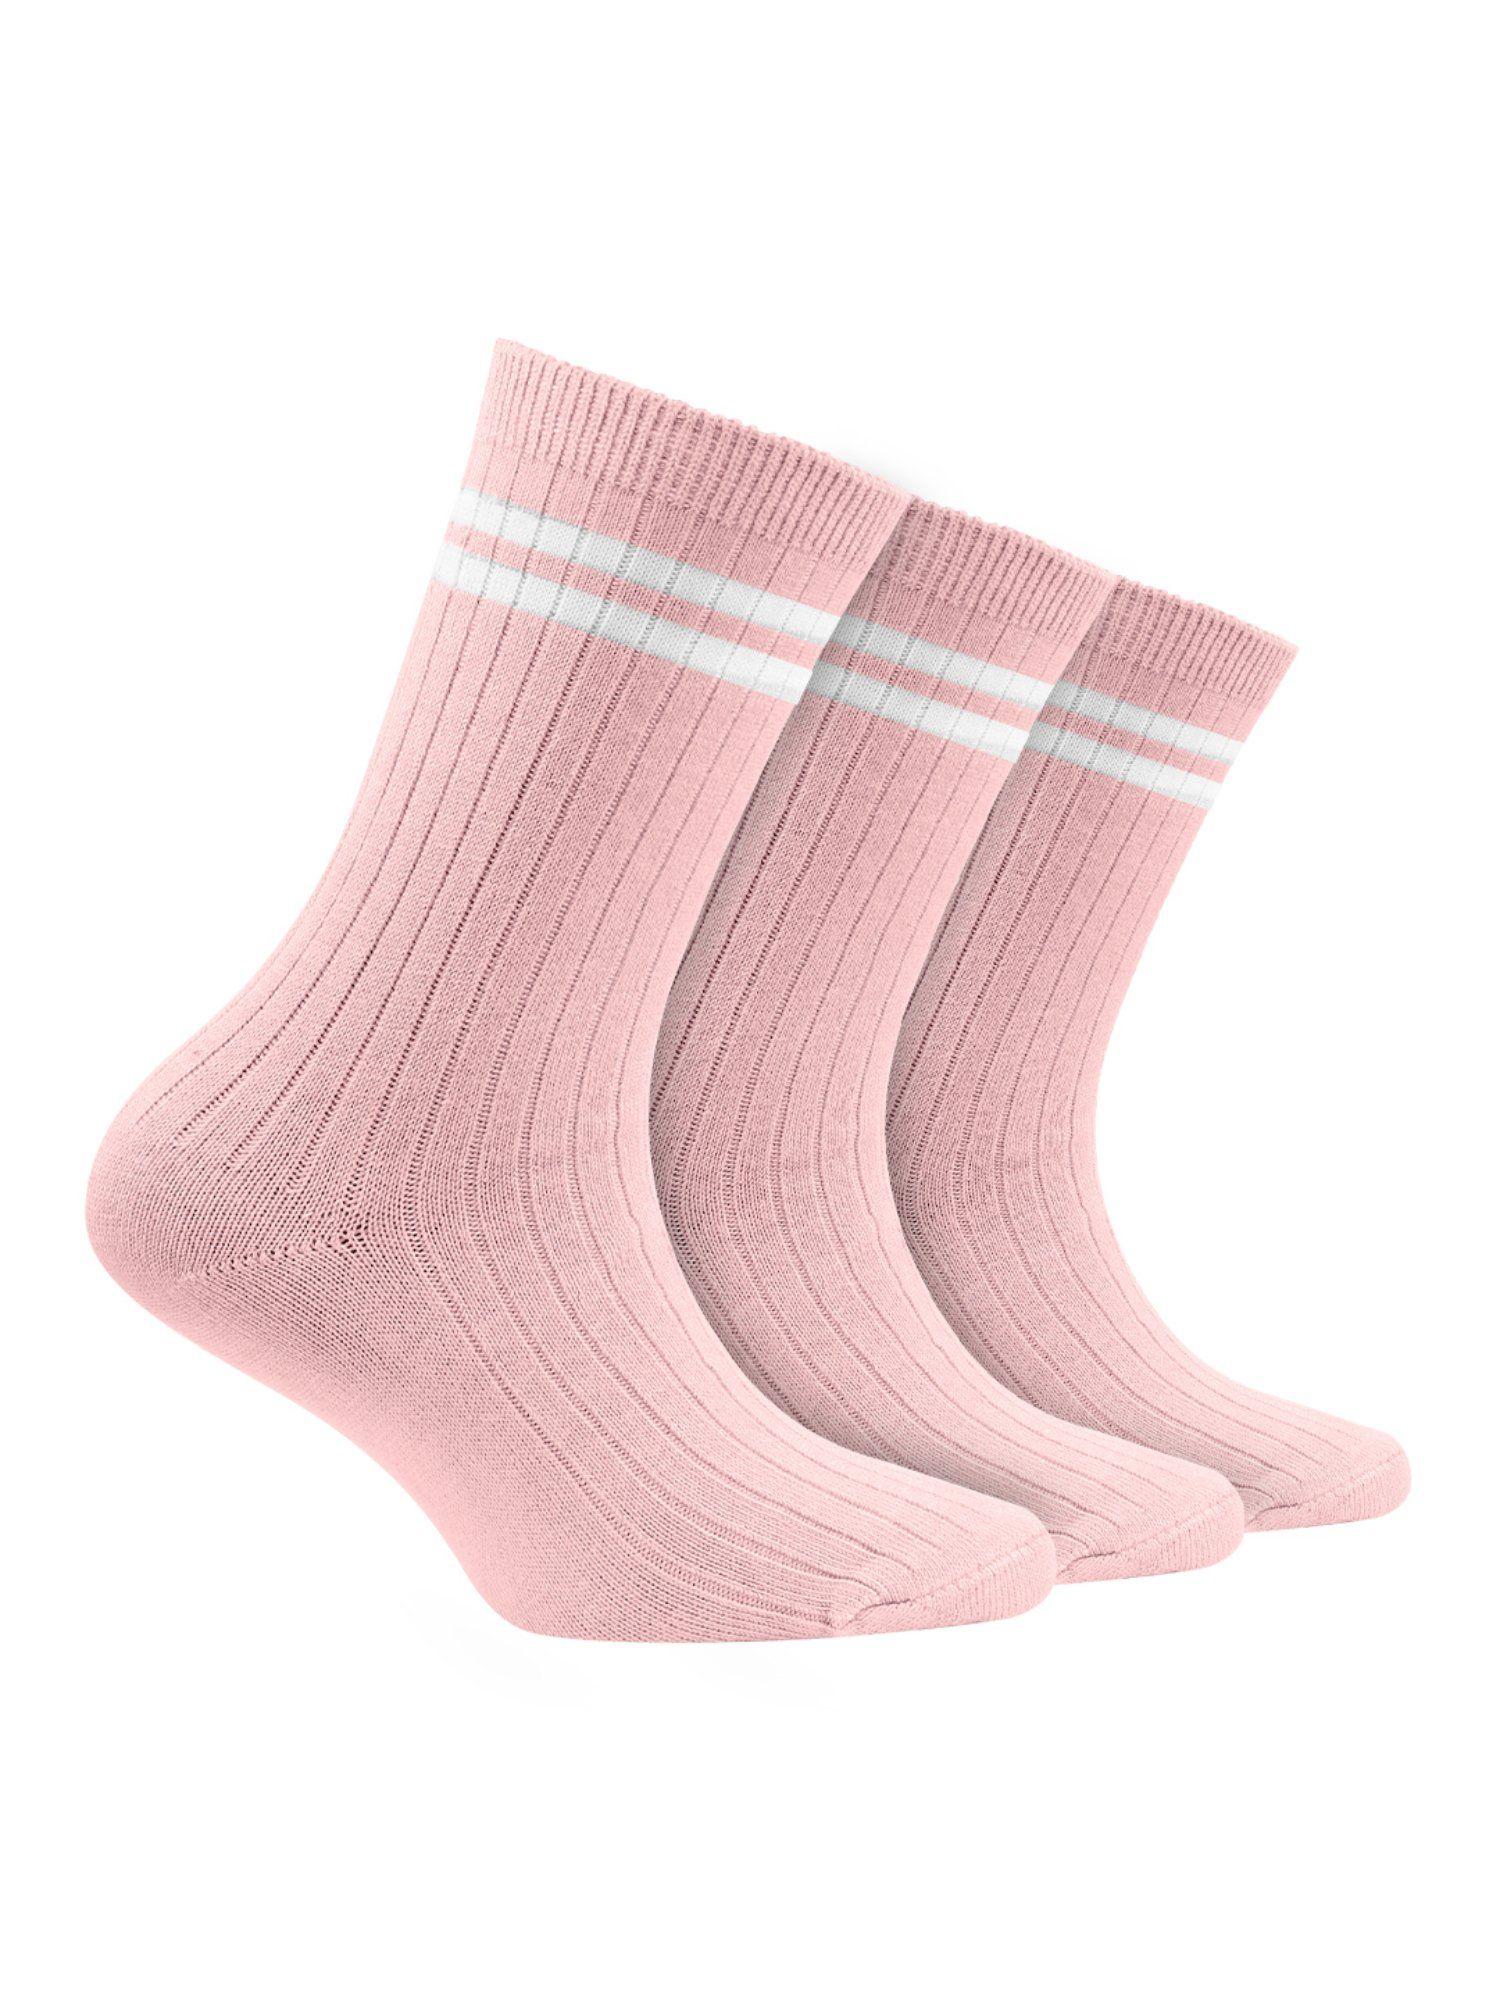 pink-oduor-free-organic-cotton-bamboo-kids-ribbed-socks-pack-of-3